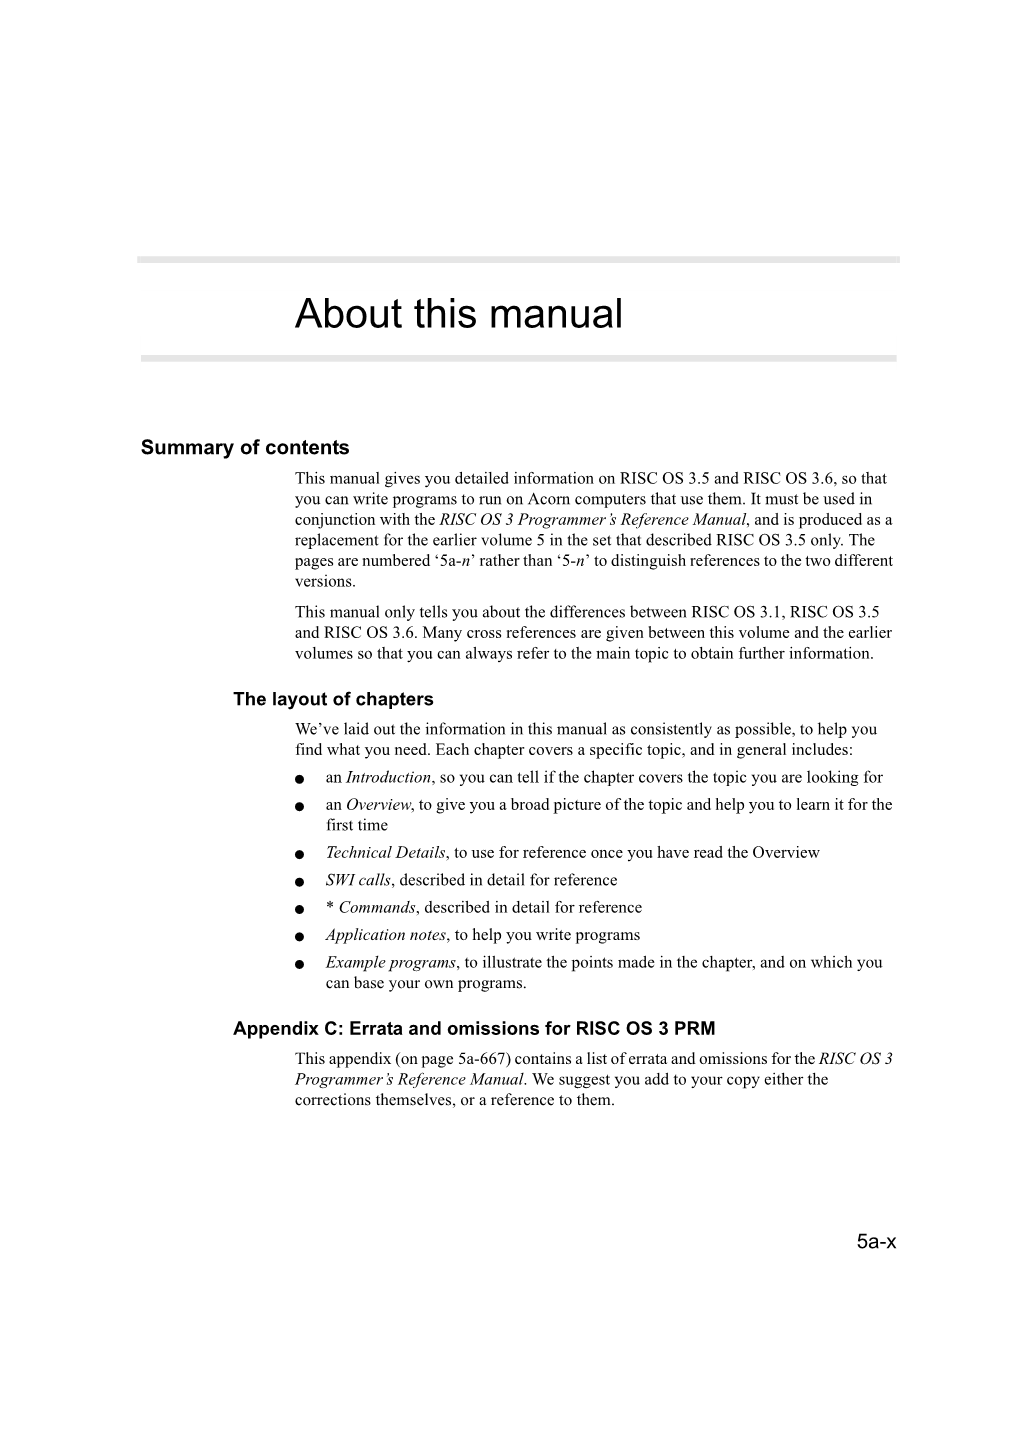 About This Manual